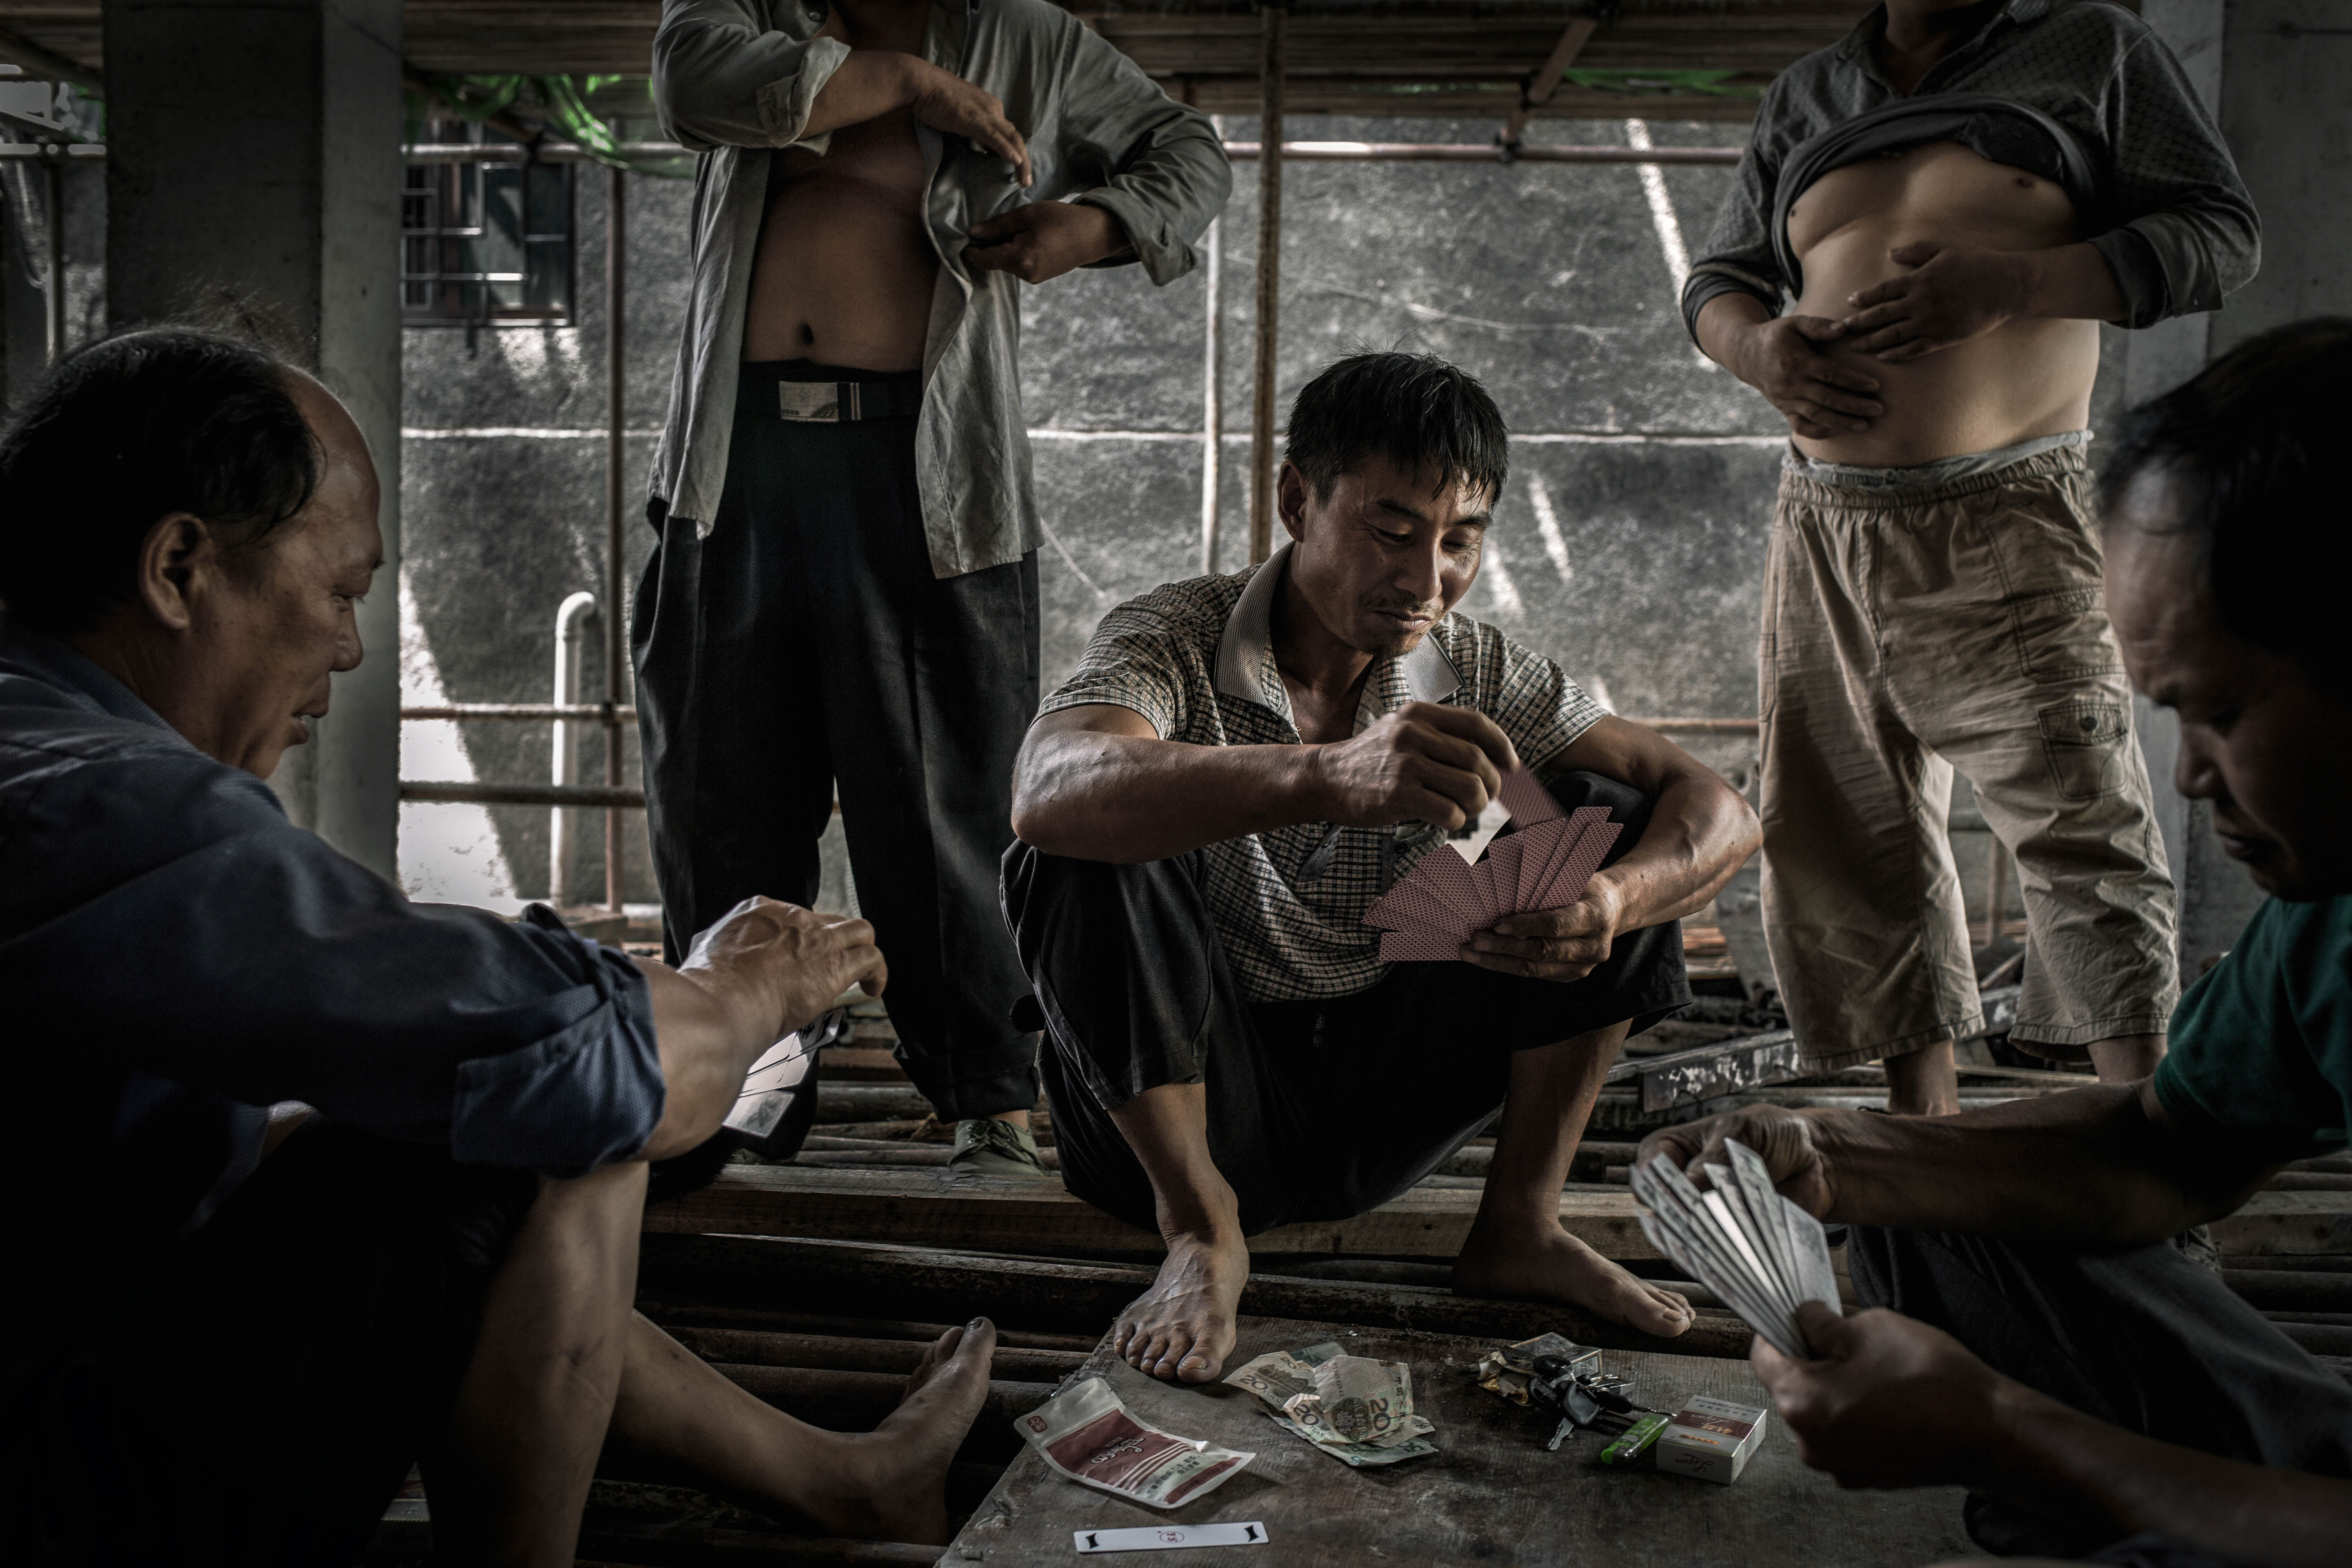 Workers resting in a Site in China .
“Rural” is the memory, the forgetfulness, and the beauty eternalized through the constant and eternal past in this photographic project. These photos represent a single moment, a painting, of the past, which disappears as modernity, in a path without return.